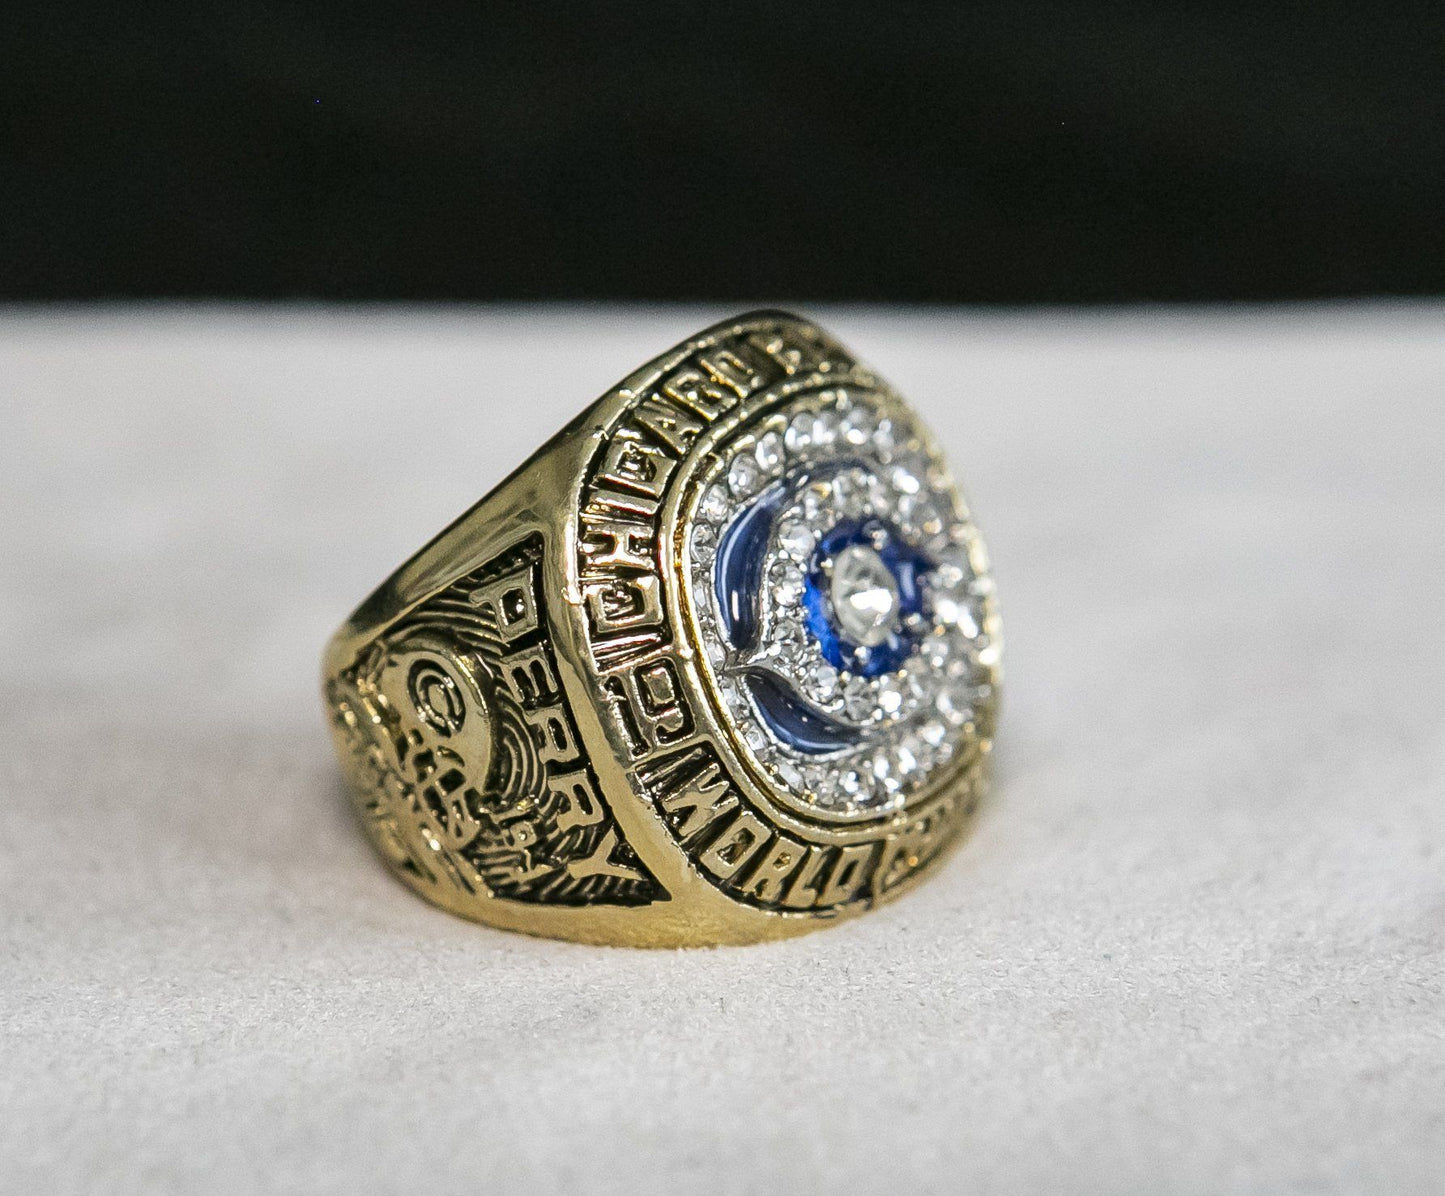 Chicago Bears Super Bowl Ring (1985) - Perry - Rings For Champs, NFL rings, MLB rings, NBA rings, NHL rings, NCAA rings, Super bowl ring, Superbowl ring, Super bowl rings, Superbowl rings, Dallas Cowboys